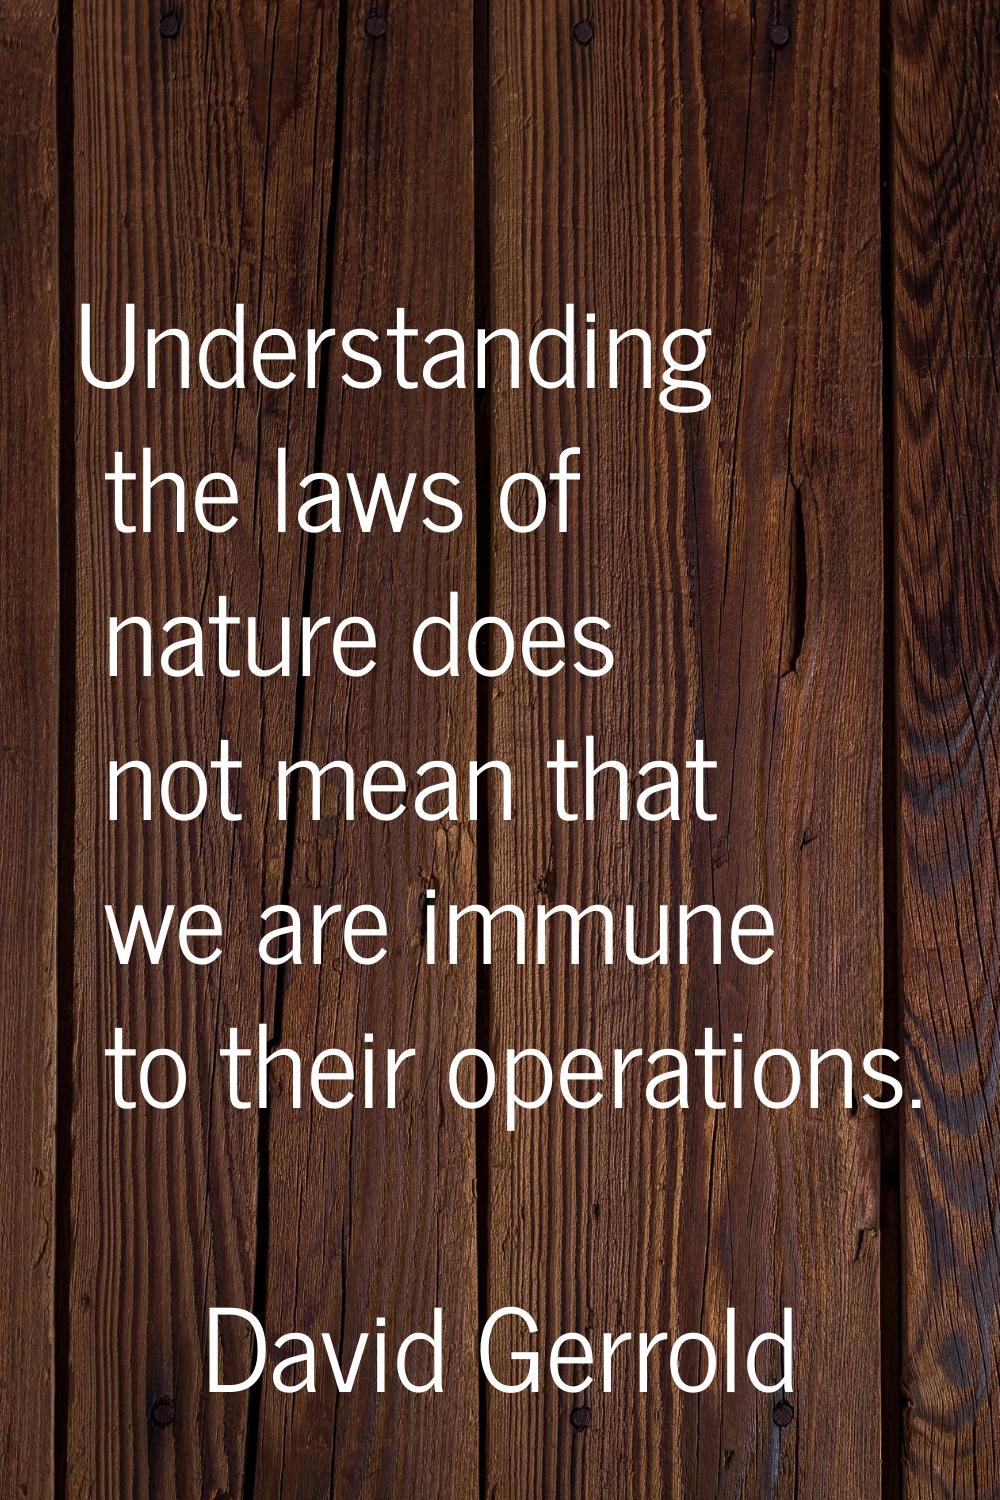 Understanding the laws of nature does not mean that we are immune to their operations.